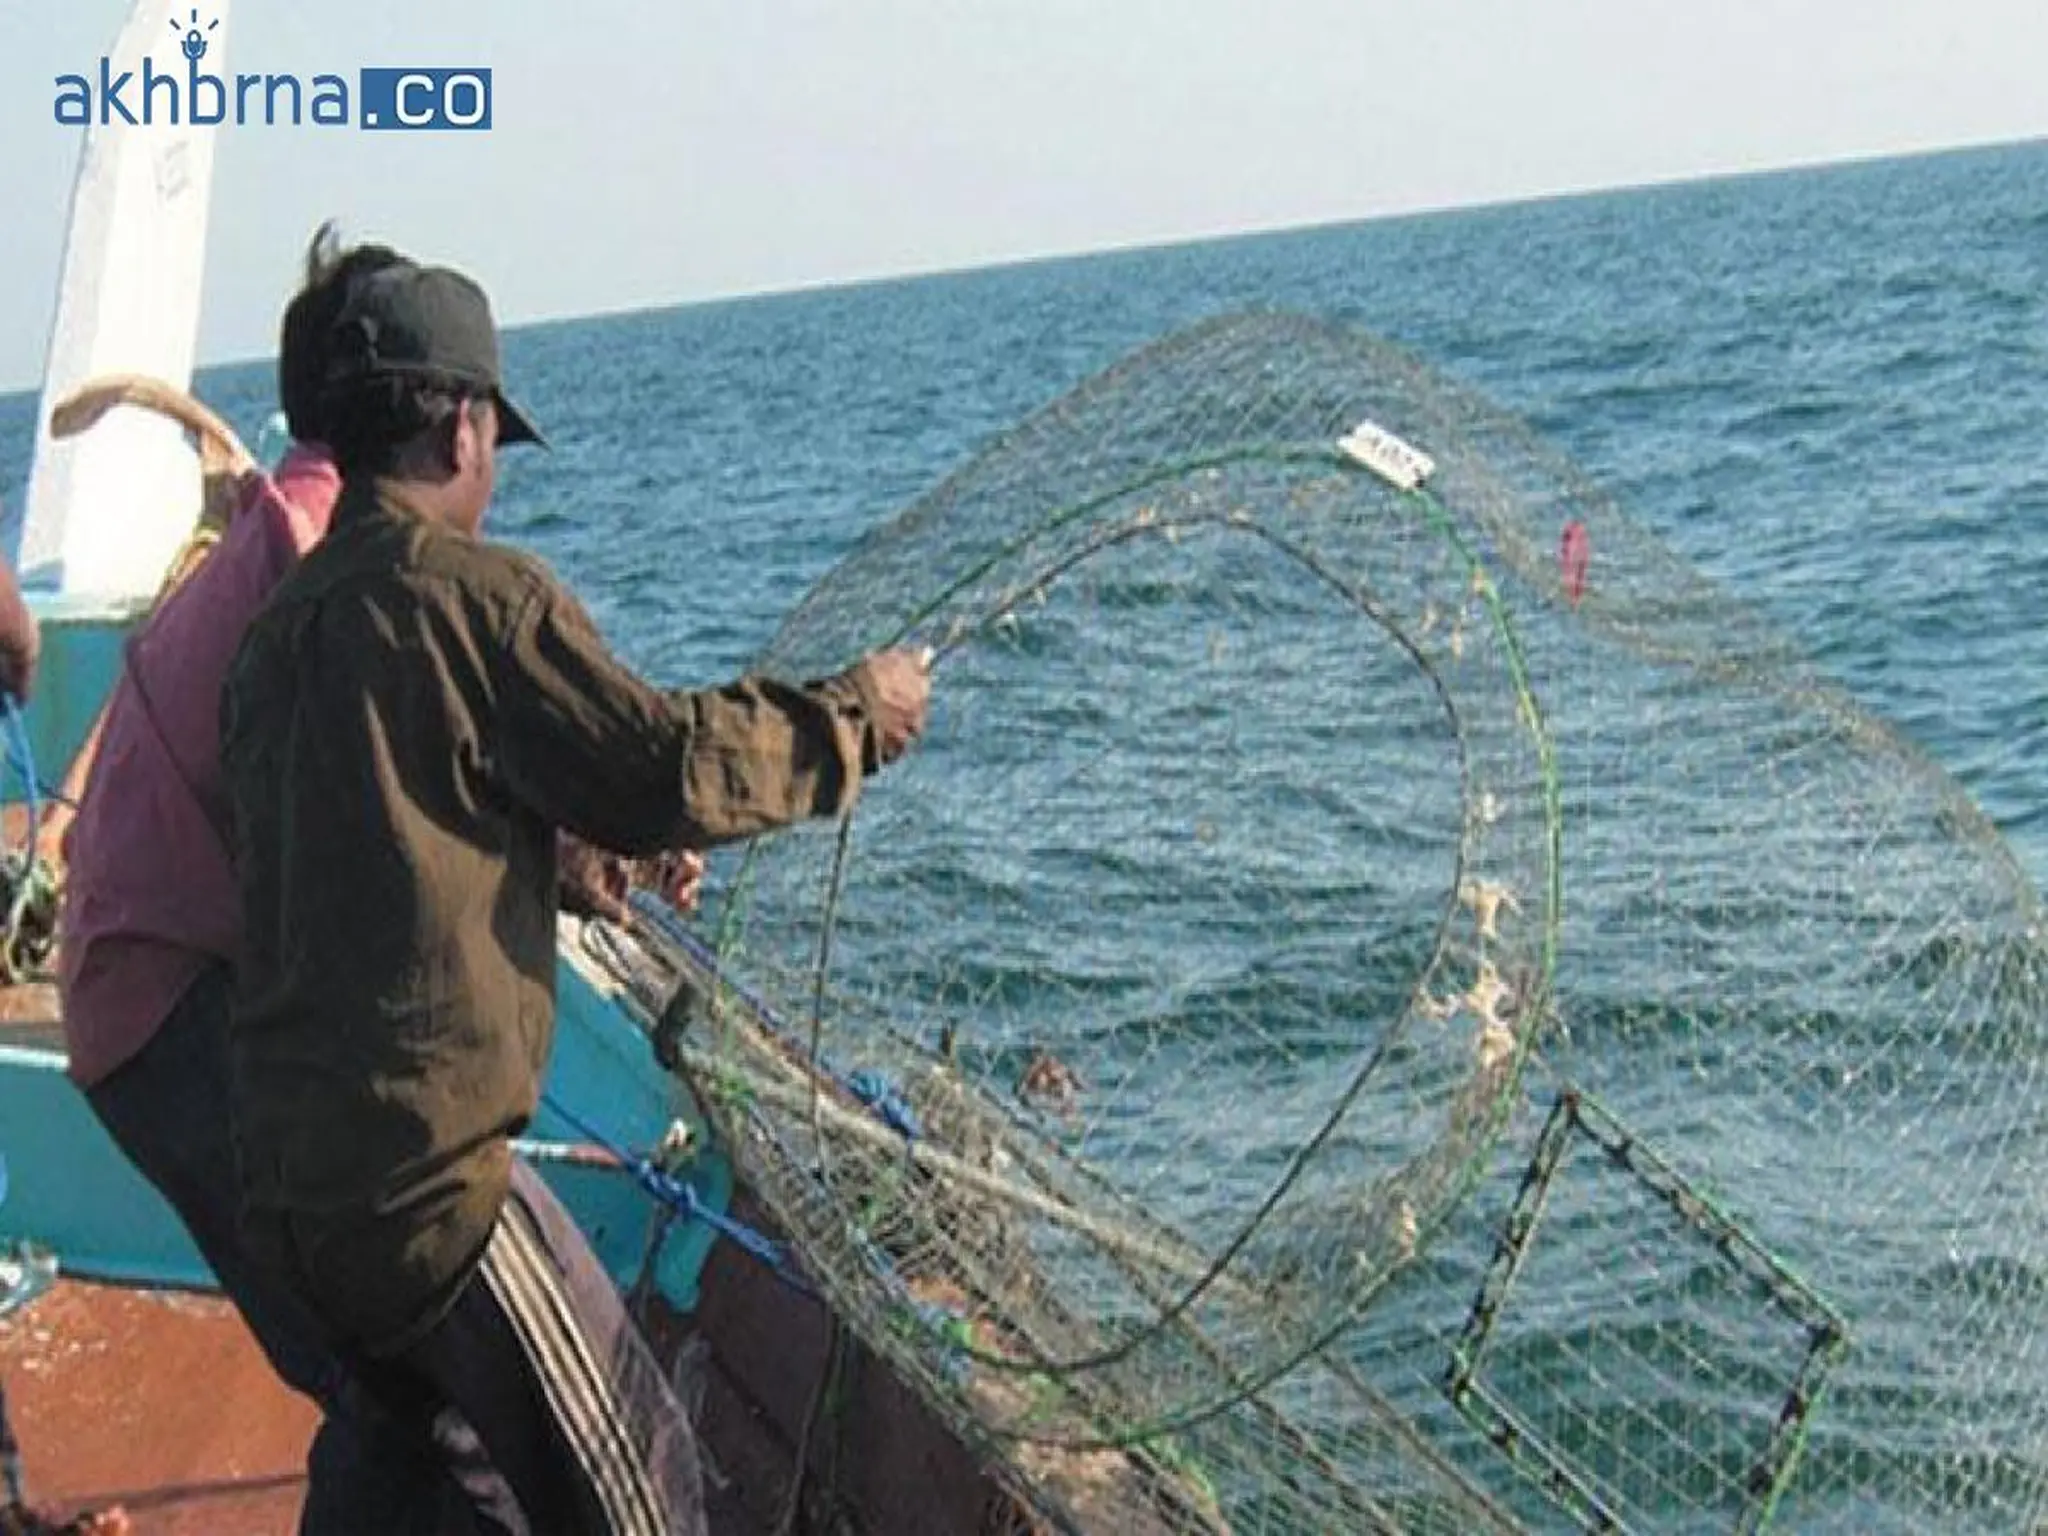 UAE issues New regulations for fishing in popular area